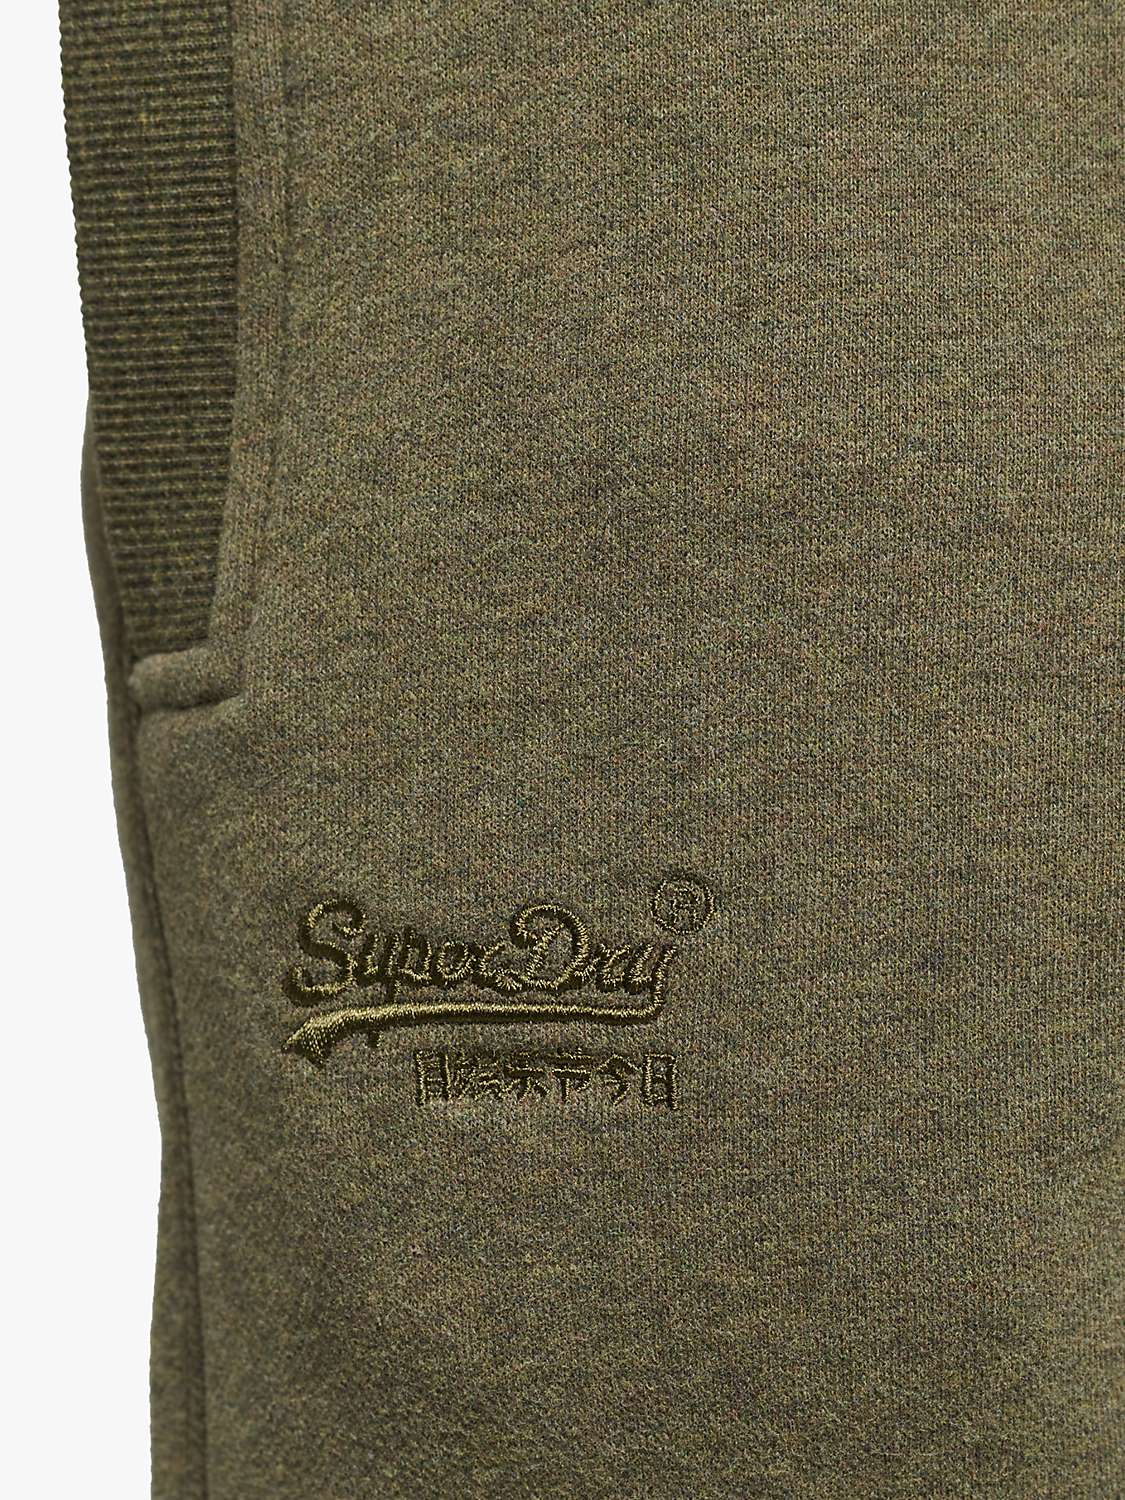 Buy Superdry Organic Cotton Vintage Logo Embroidered Joggers Online at johnlewis.com